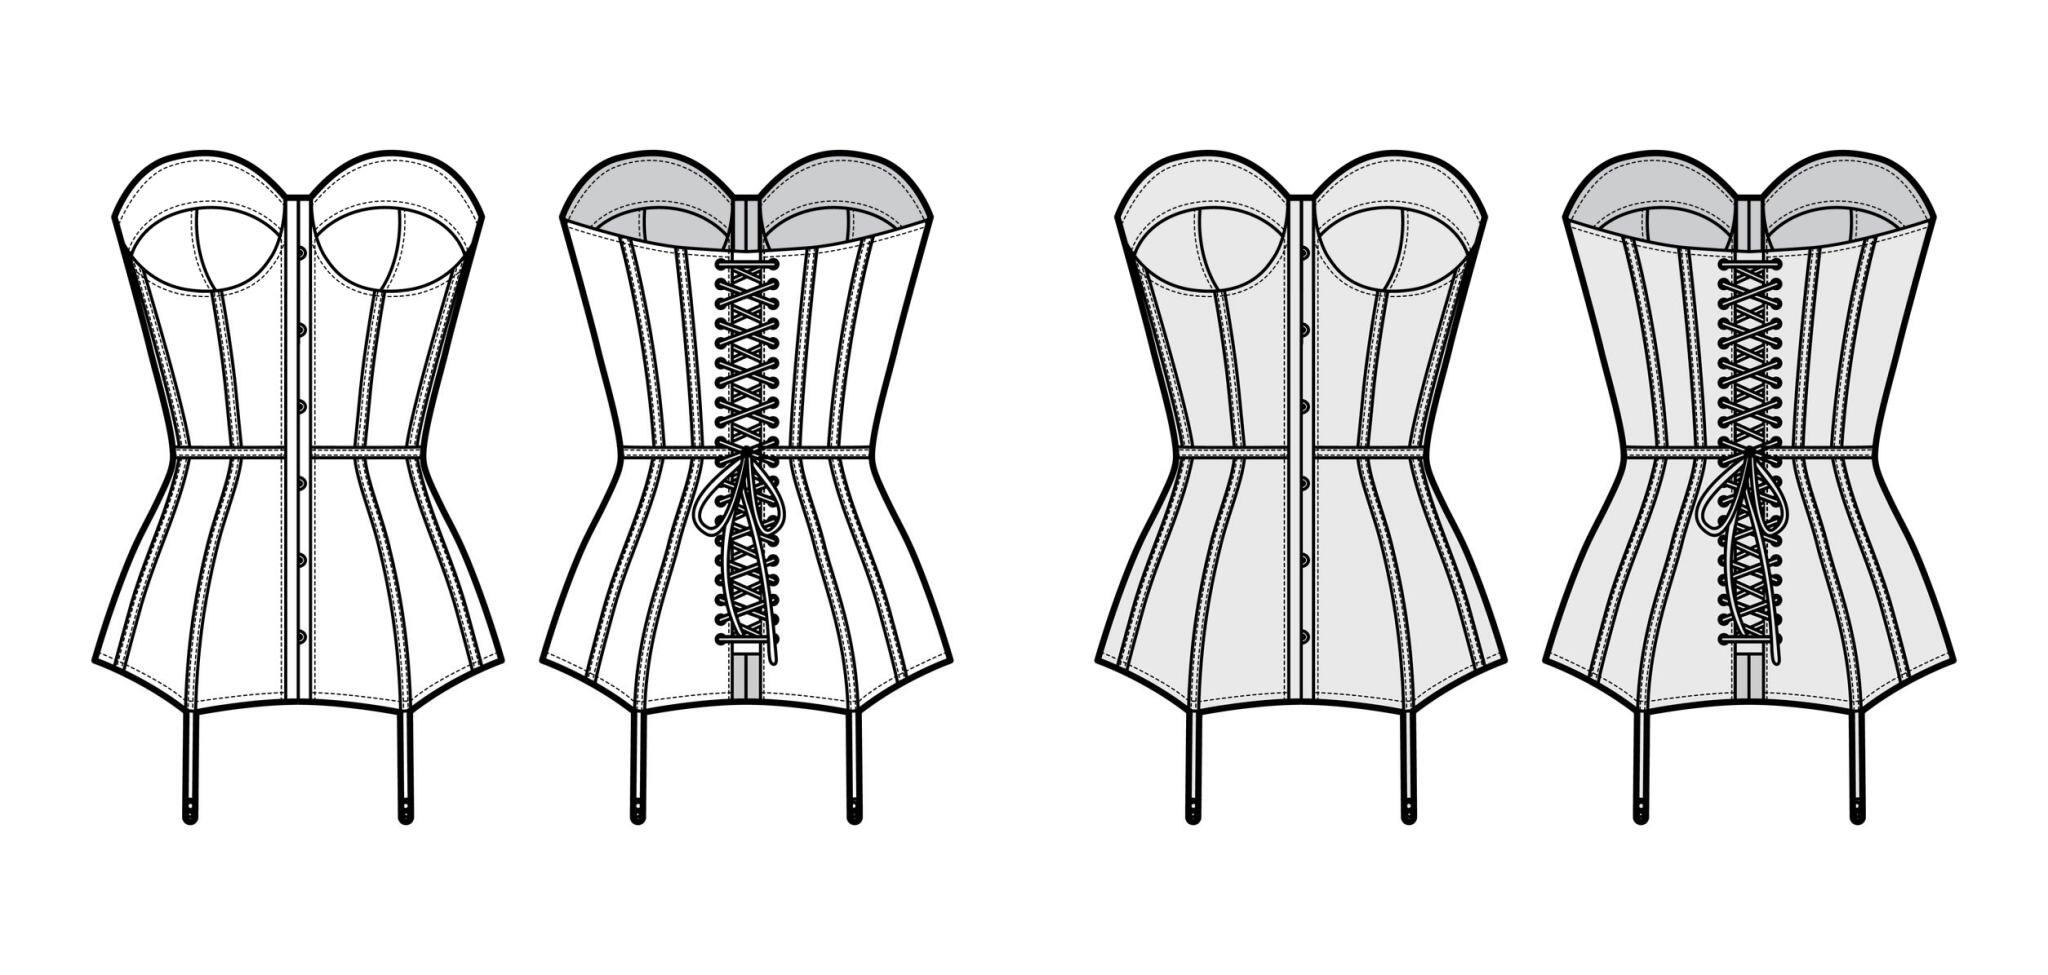 The Elegance and Evolution of Underbust Corsets